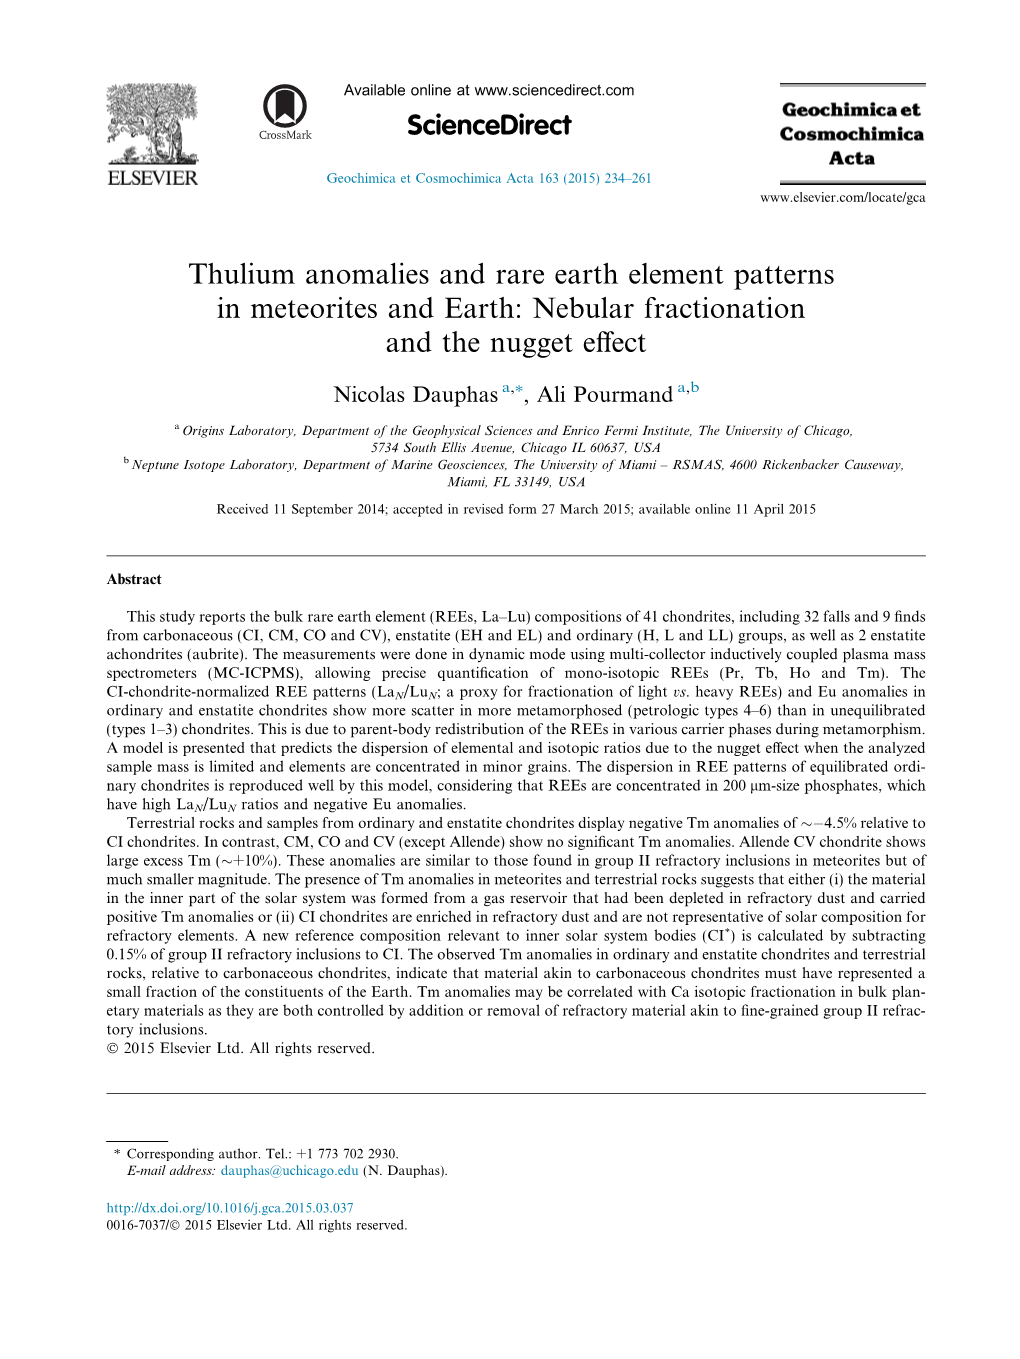 Thulium Anomalies and Rare Earth Element Patterns in Meteorites and Earth: Nebular Fractionation and the Nugget Eﬀect